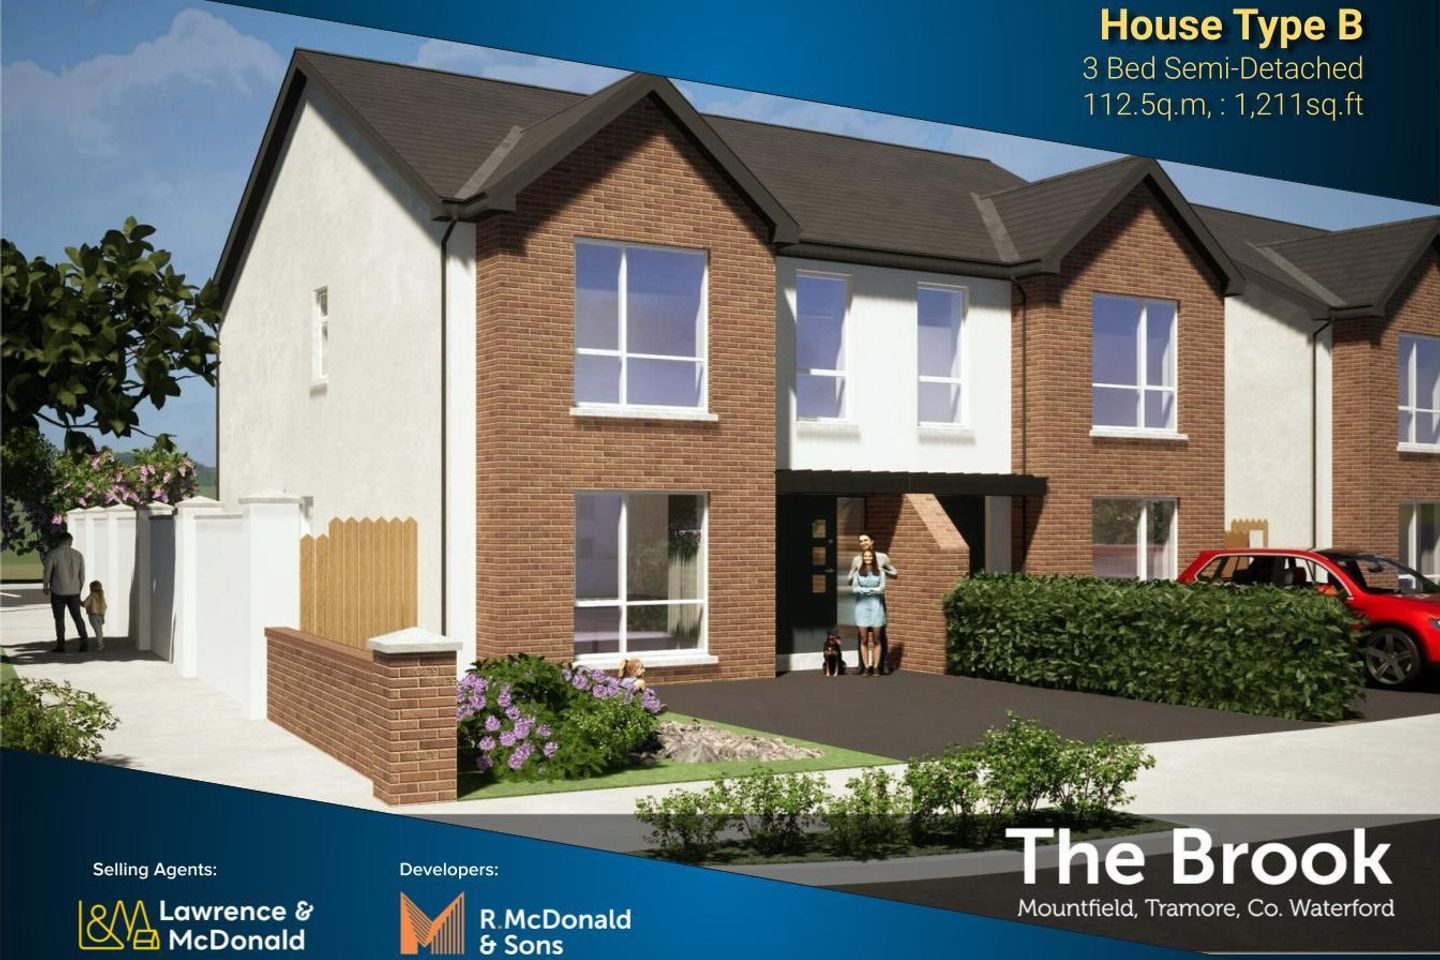 House Type B, The Brook, Mountfield, Tramore, Co. Waterford, The Brook, Mountfield, Tramore, Tramore, Co. Waterford